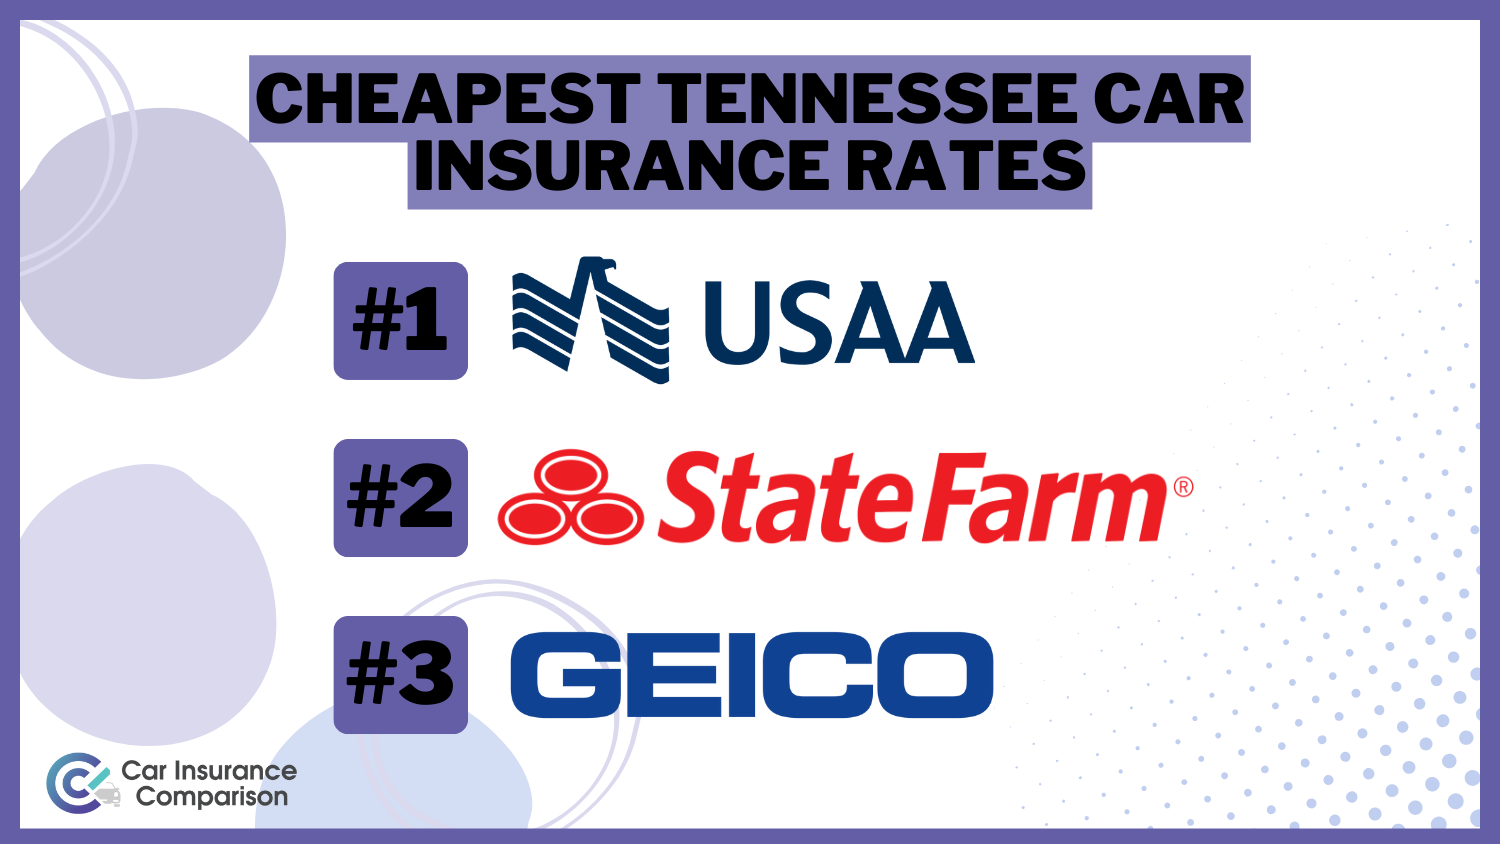 Cheapest Tennessee Car Insurance Rates : USAA, State Farm, Geico